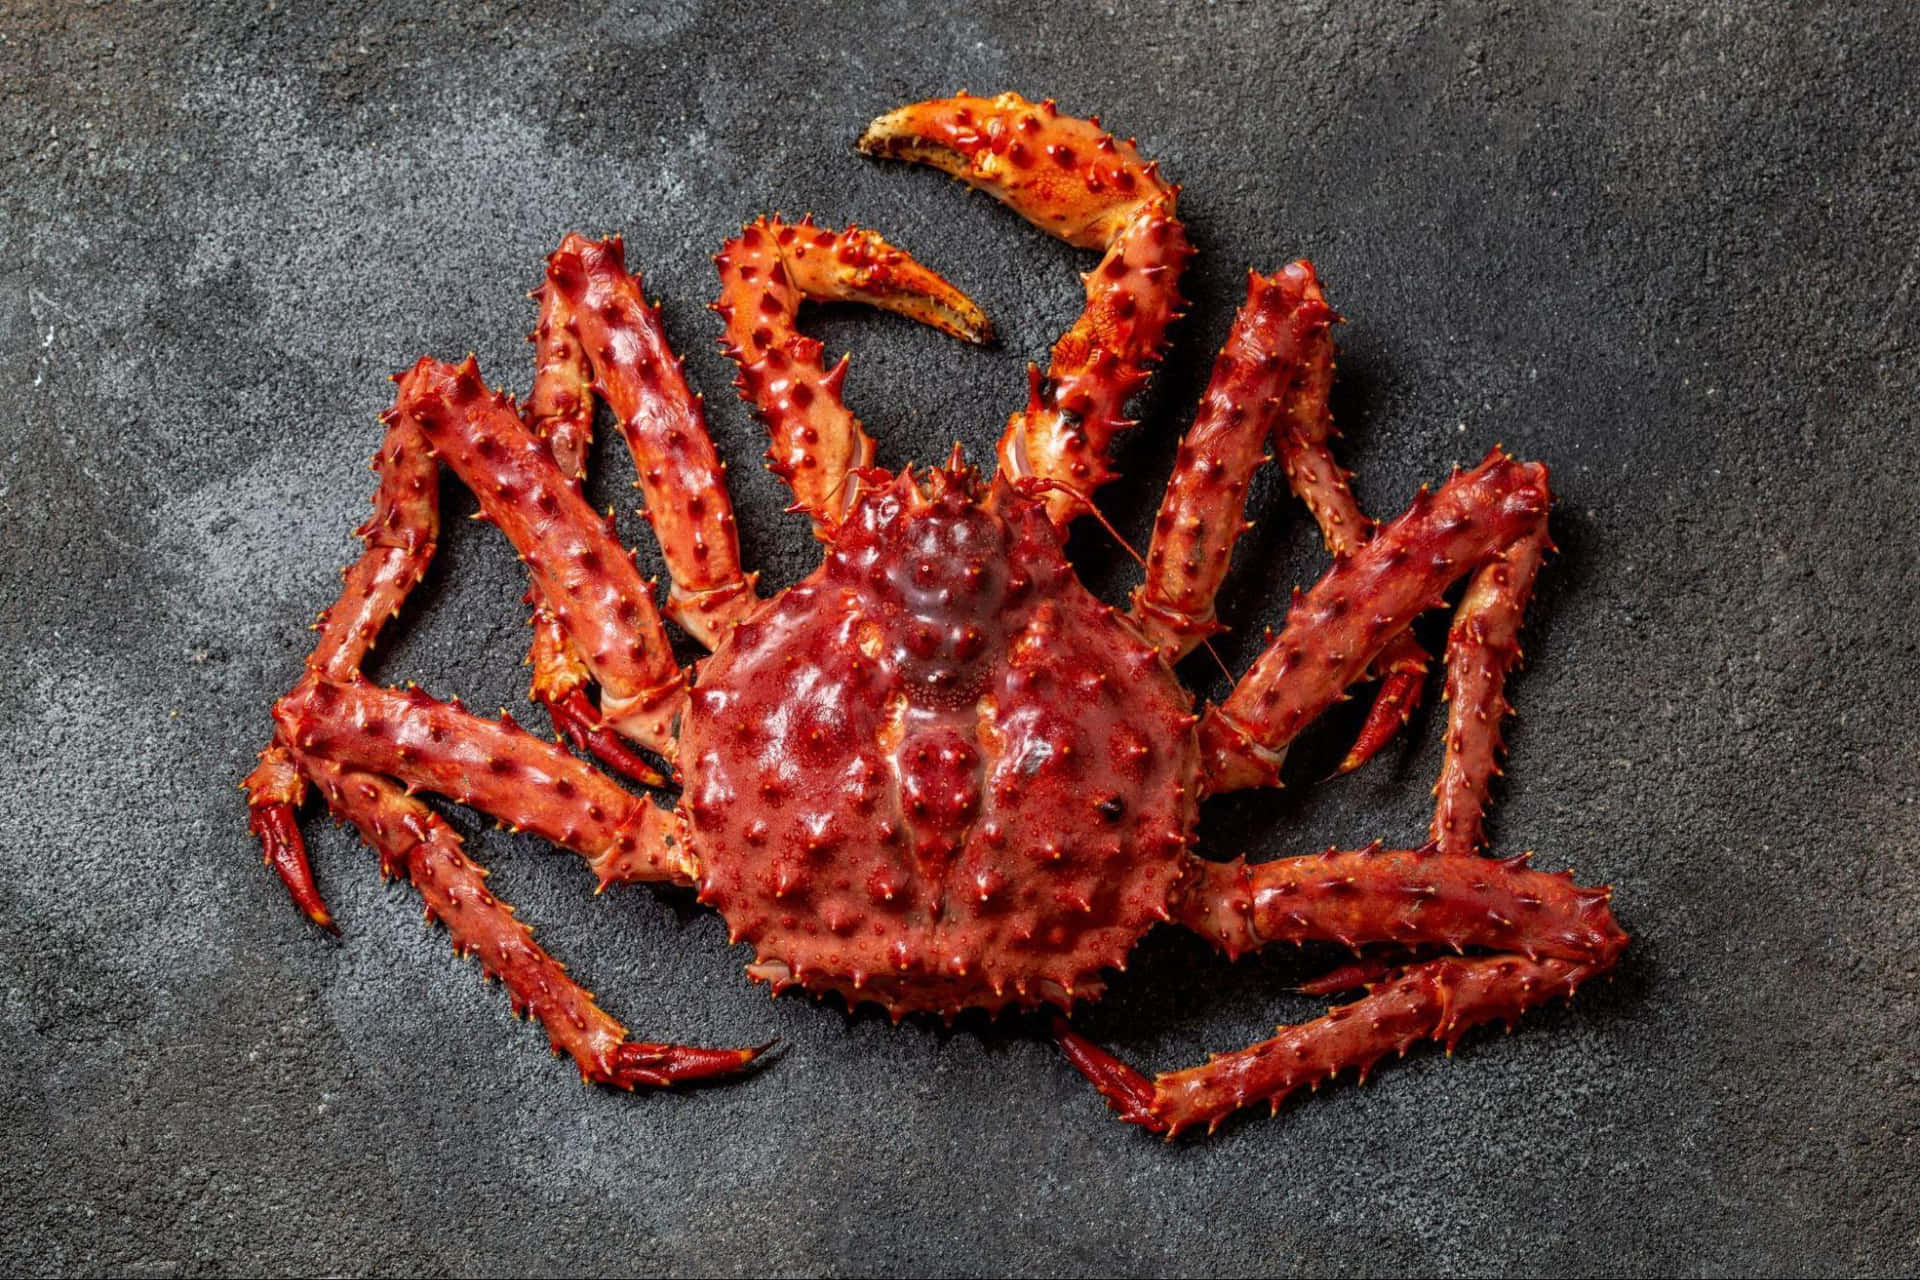 A Close-Up Look at the Details of a Crab